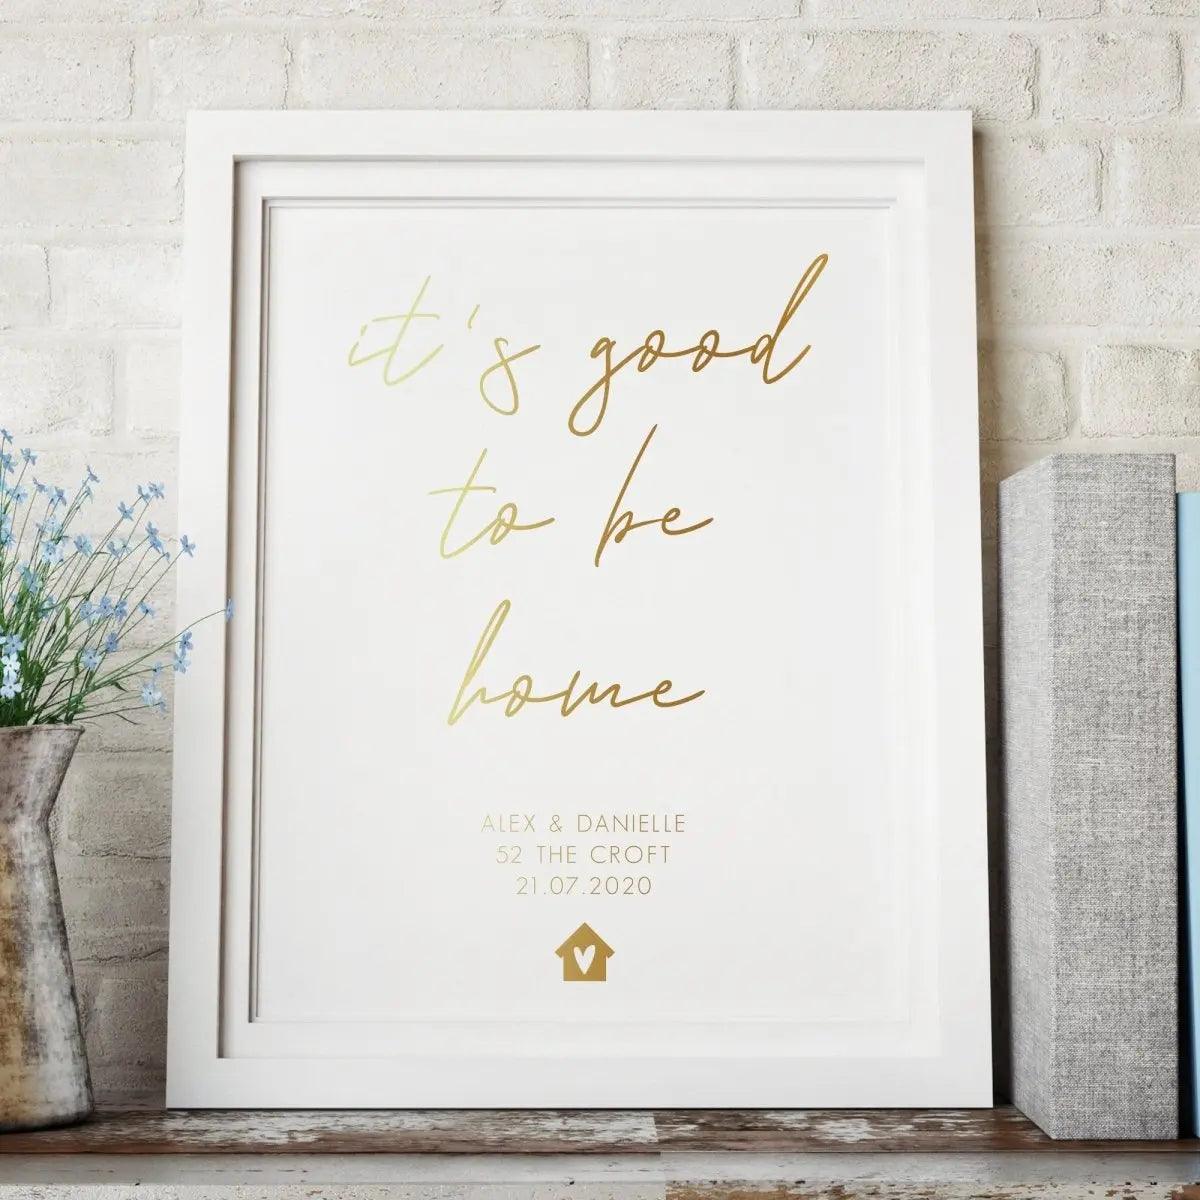 Personalised New Home Print, Housewarming Gift, Housewarming Present, New Home Present, Custom New Home Wall Art, Home Gifts, Moving House - Amy Lucy